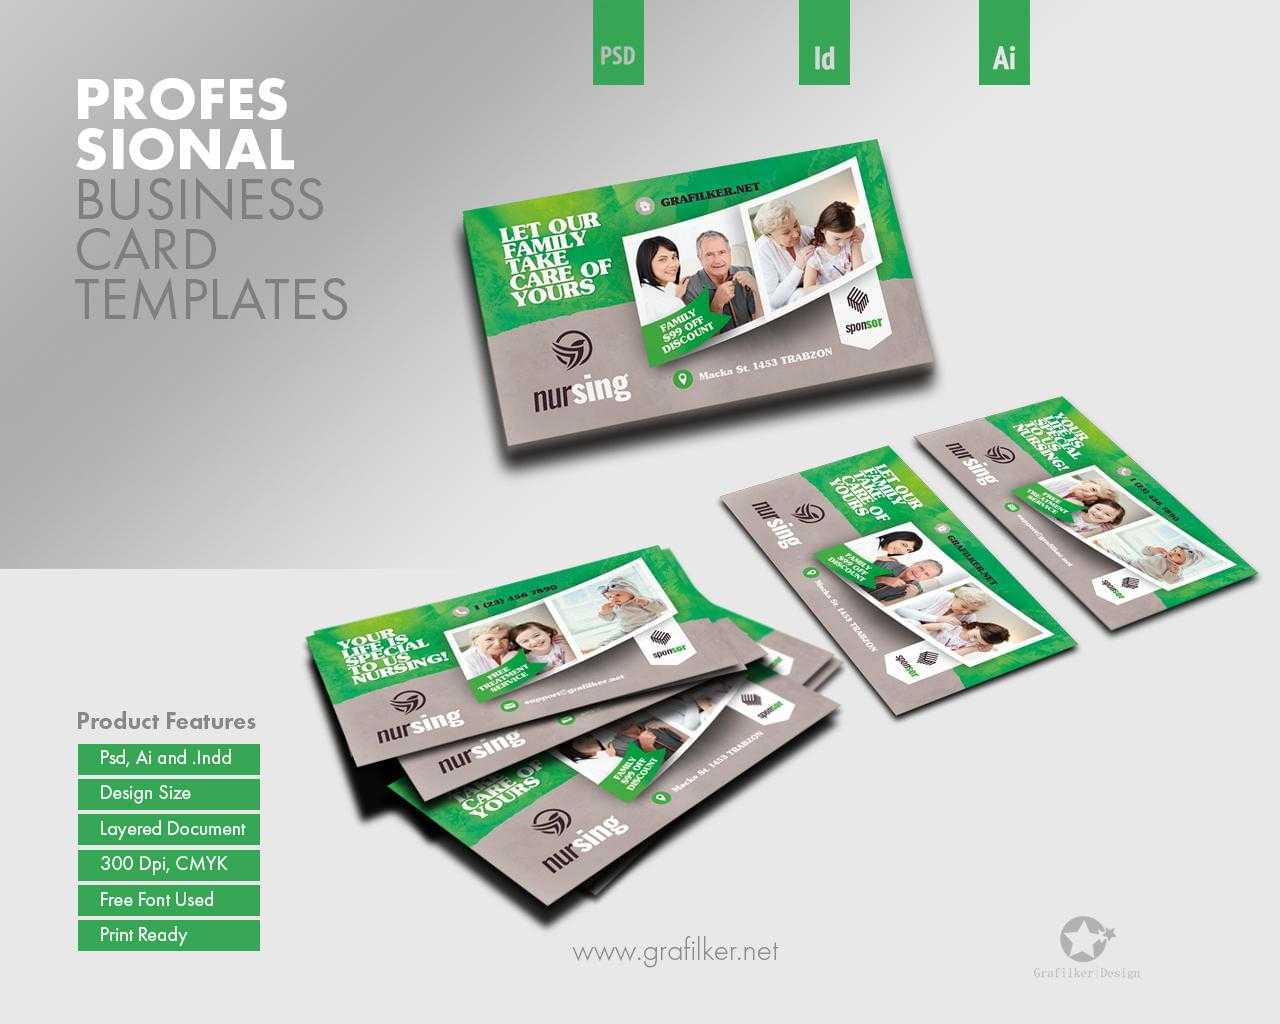 Professional Business Card Templatesgrafilker On Envato In Advertising Cards Templates